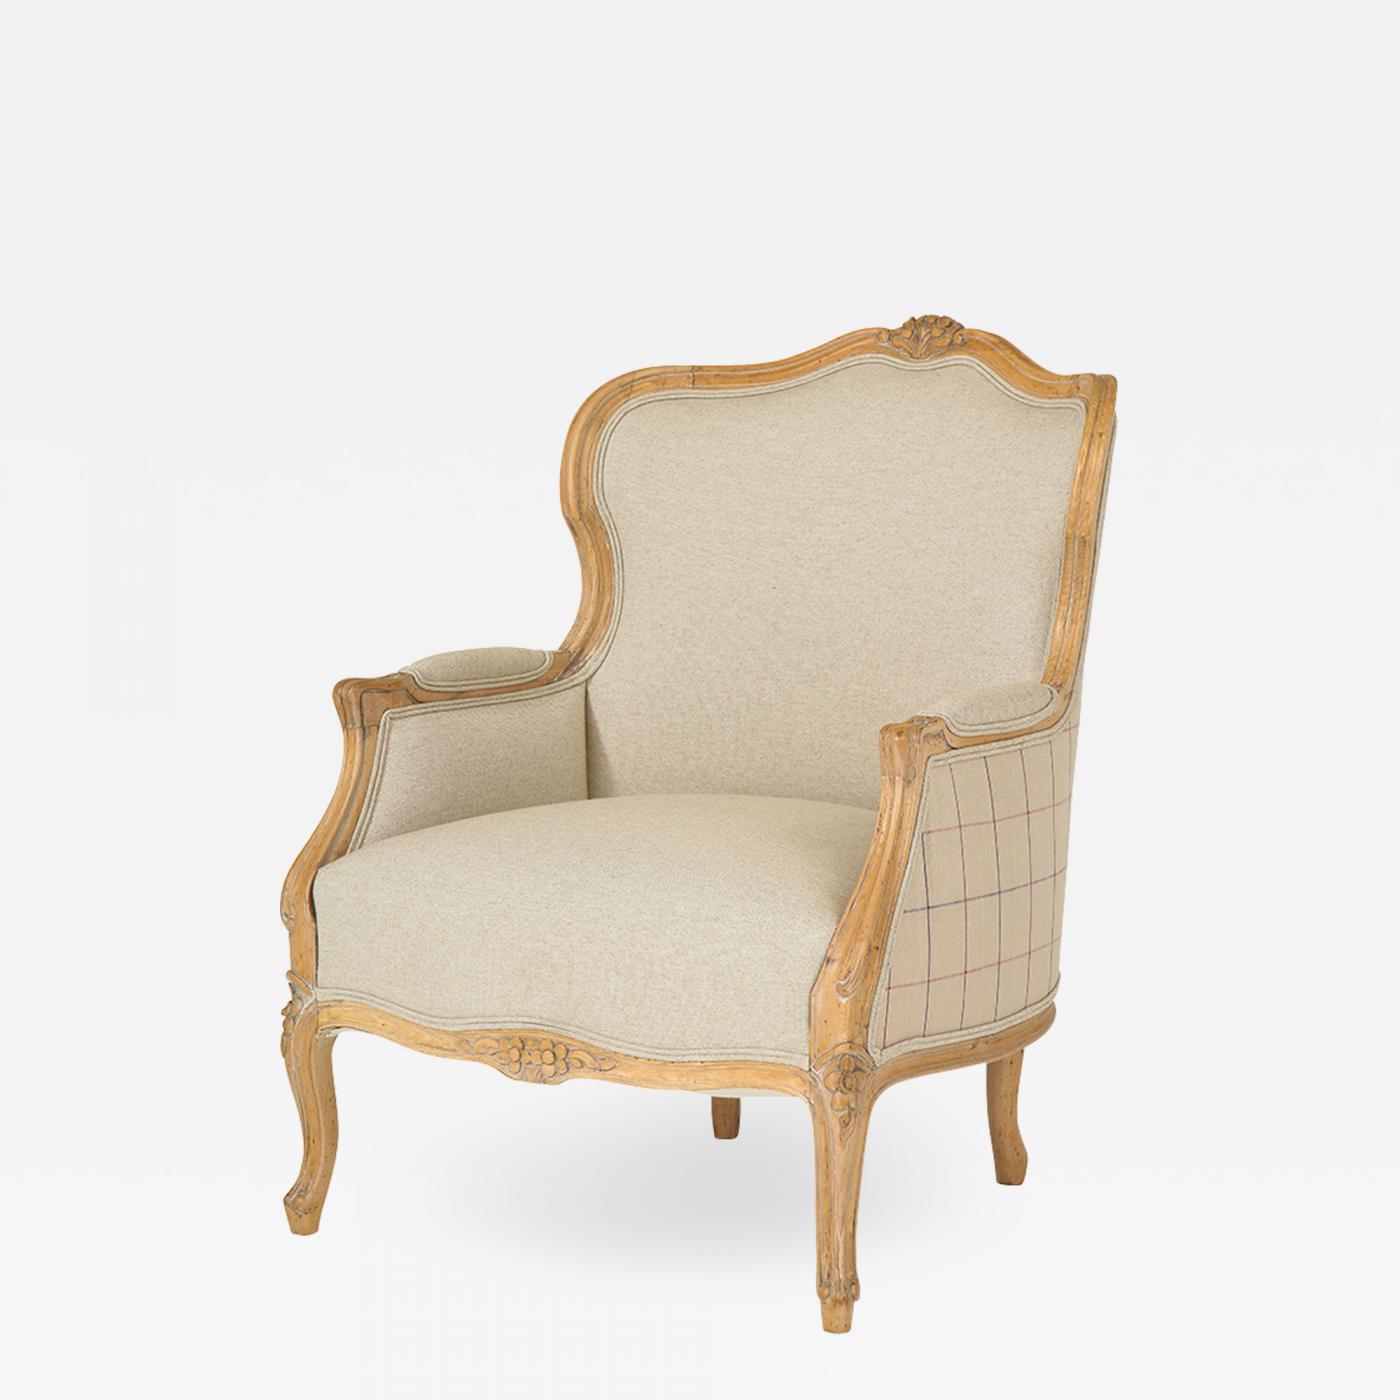 A nineteenth century, French upholstered Louis XV style bergere chair.